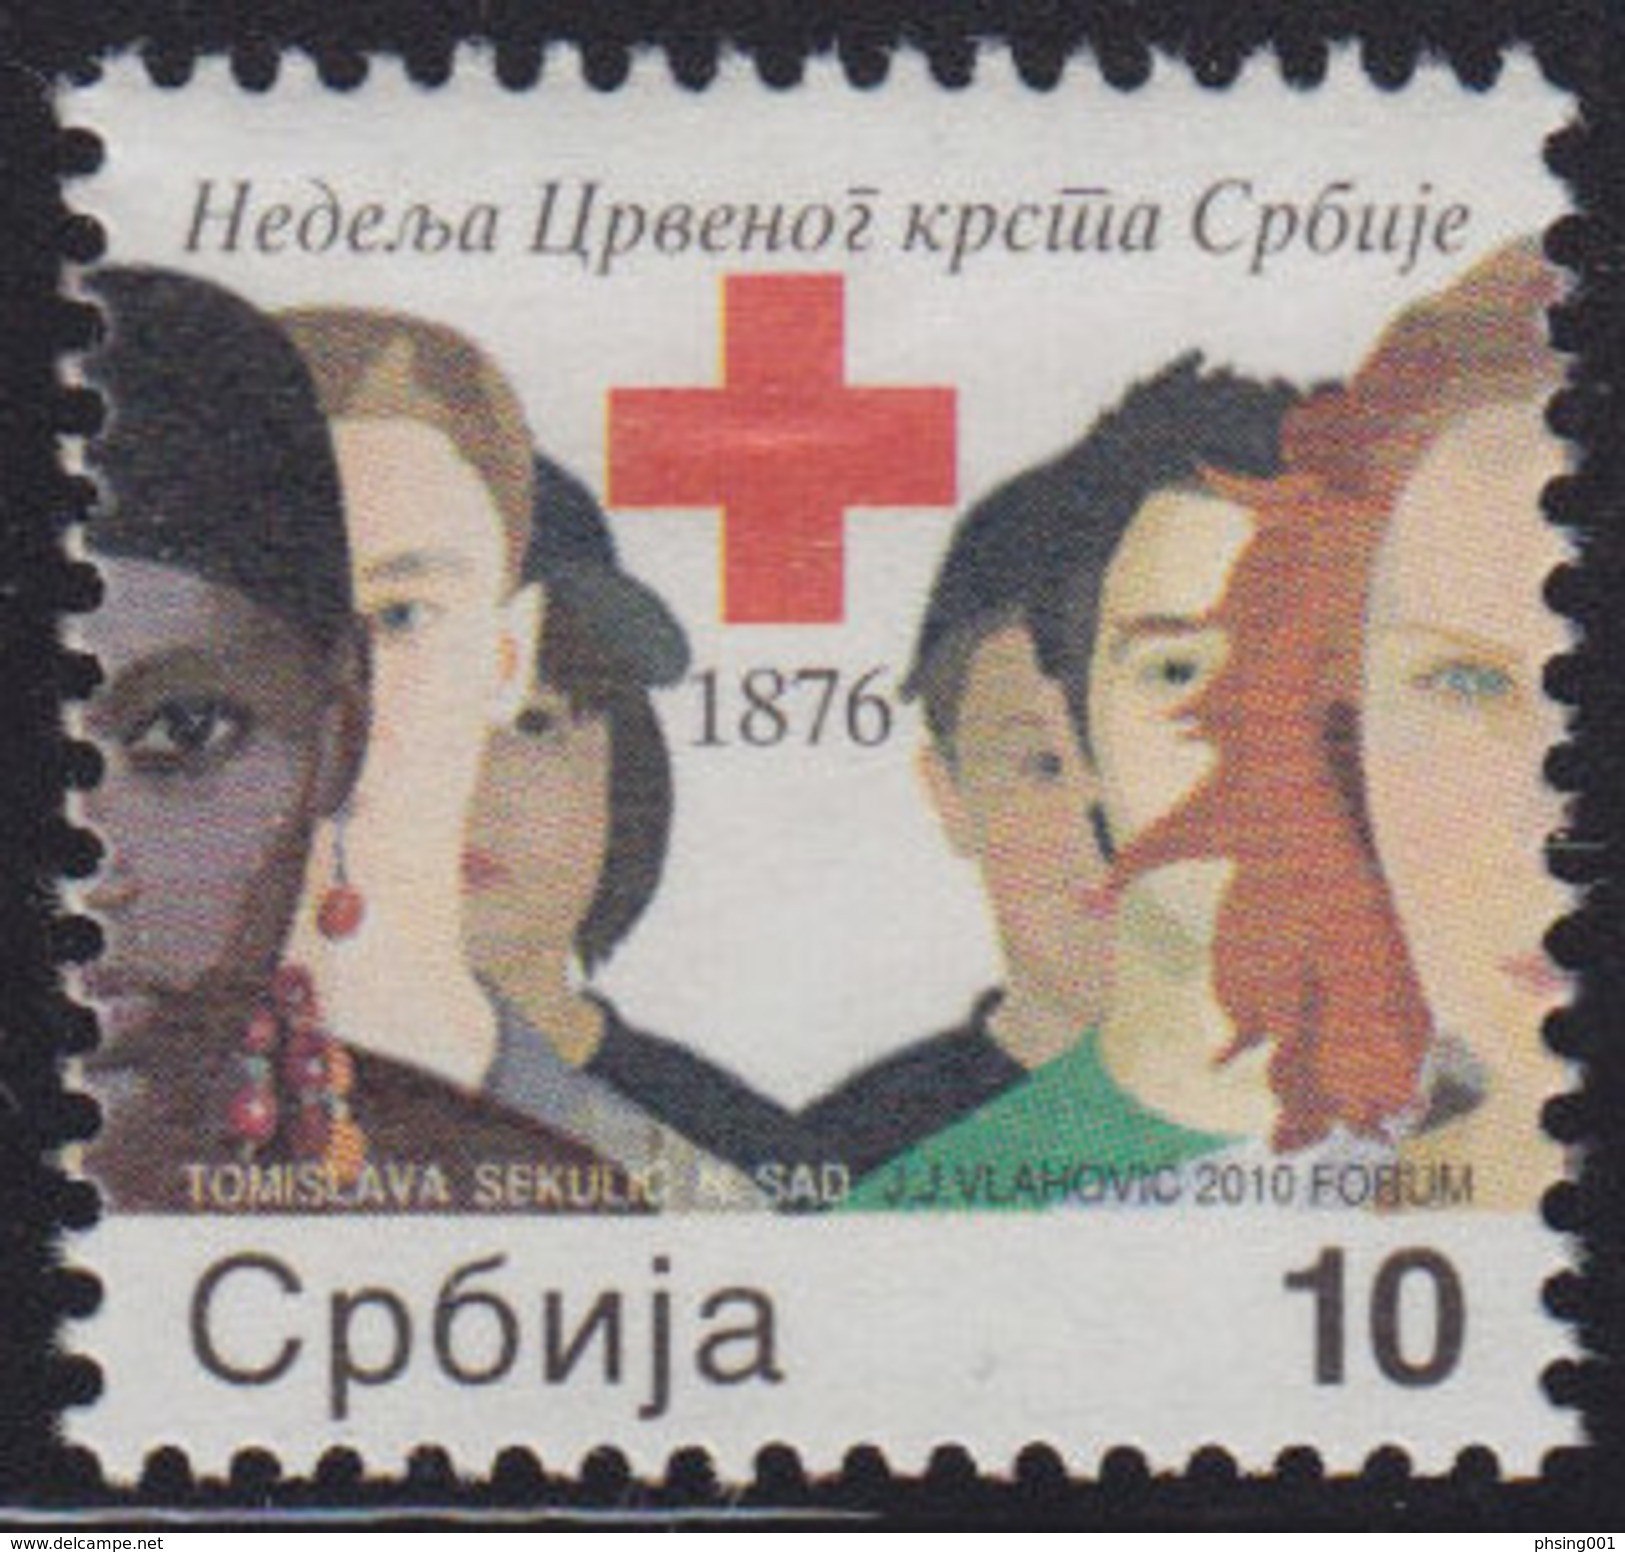 Serbia 2010 Red Cross Rotes Kreuz Croix Rouge, Tax, Charity, Surcharge Stamp MNH - Serbie